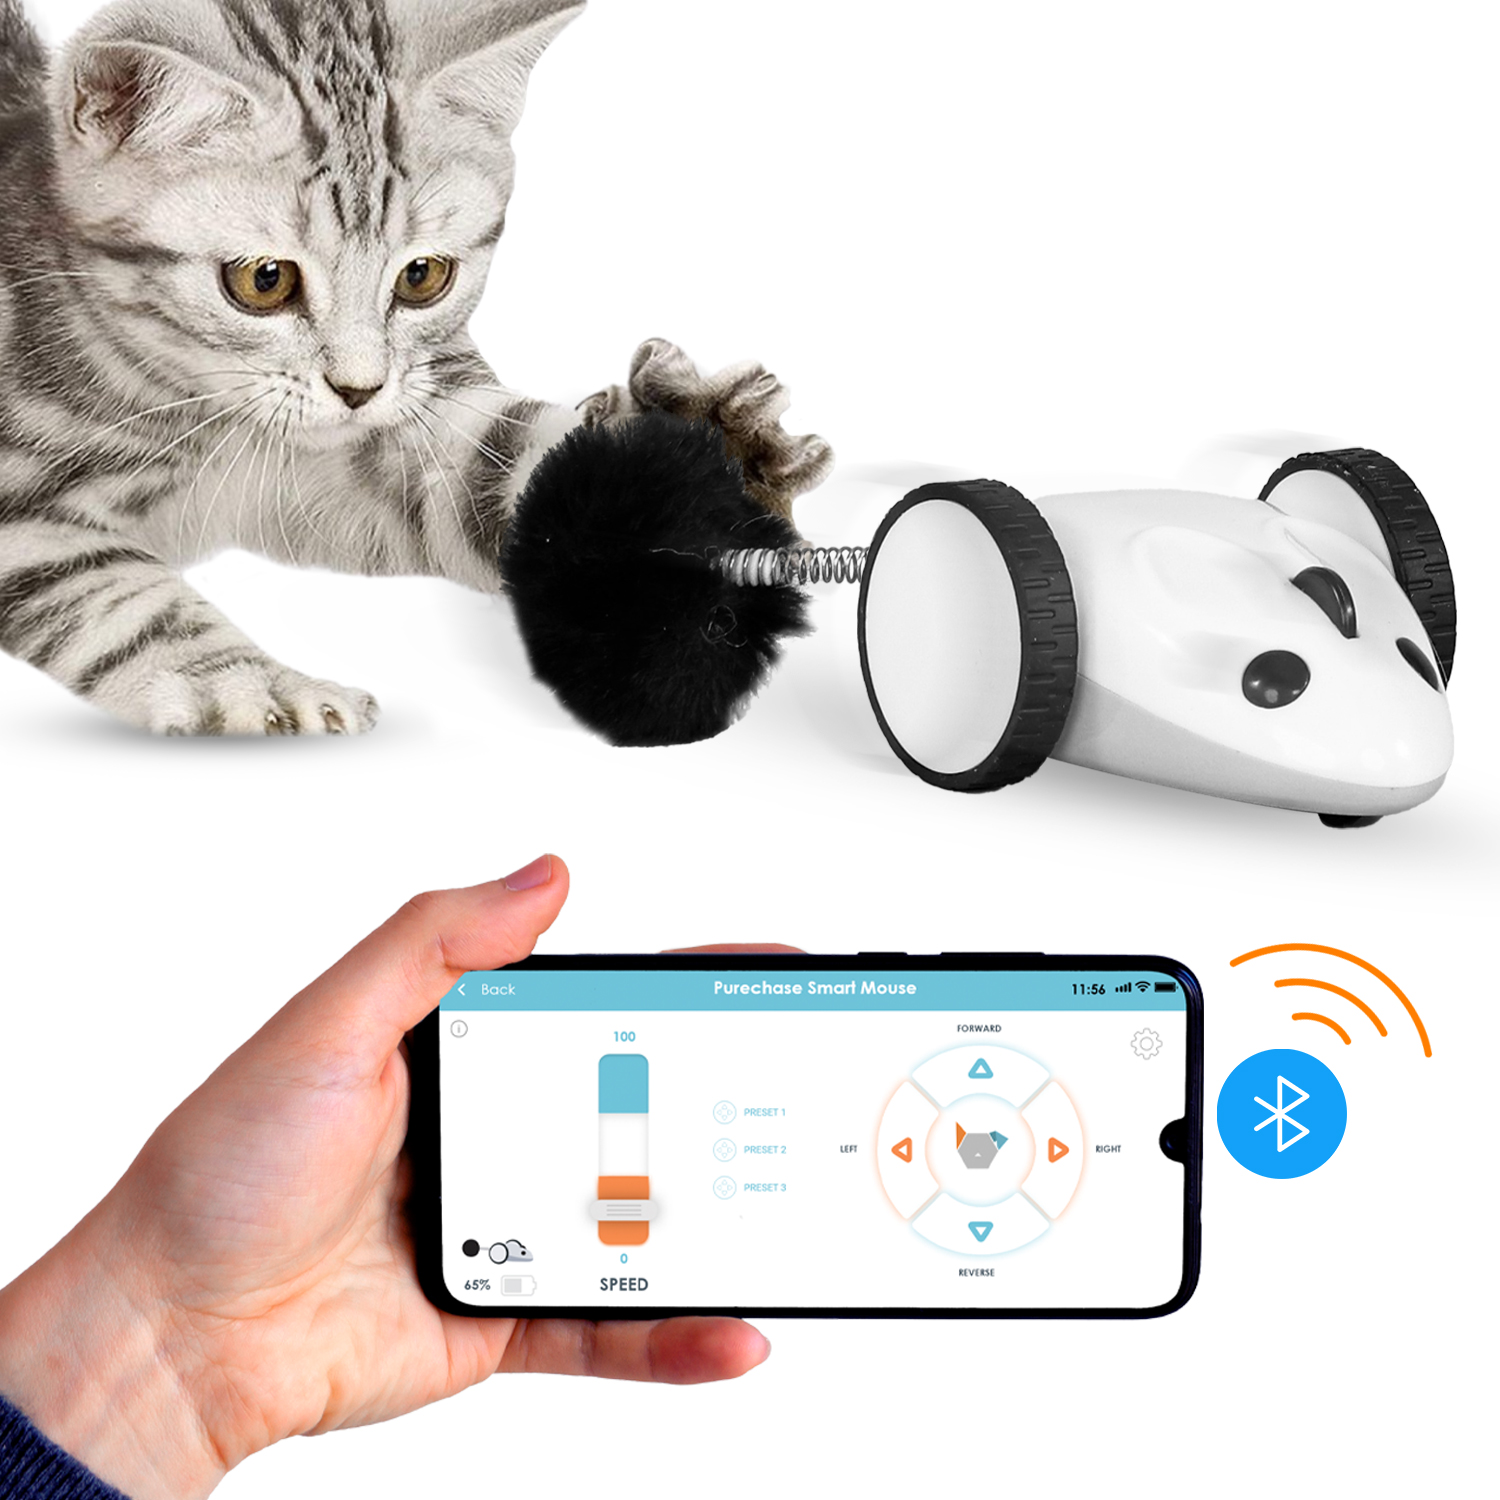 Instachew Purechase Smart Cat Toy, Interactive Automatic Mouse shaped Toy for Pets, App Enabled with Adjustable Speed, Flip Modes, Replaceable Plush Tail and USB Charging for Kittens and Dogs - image 1 of 8